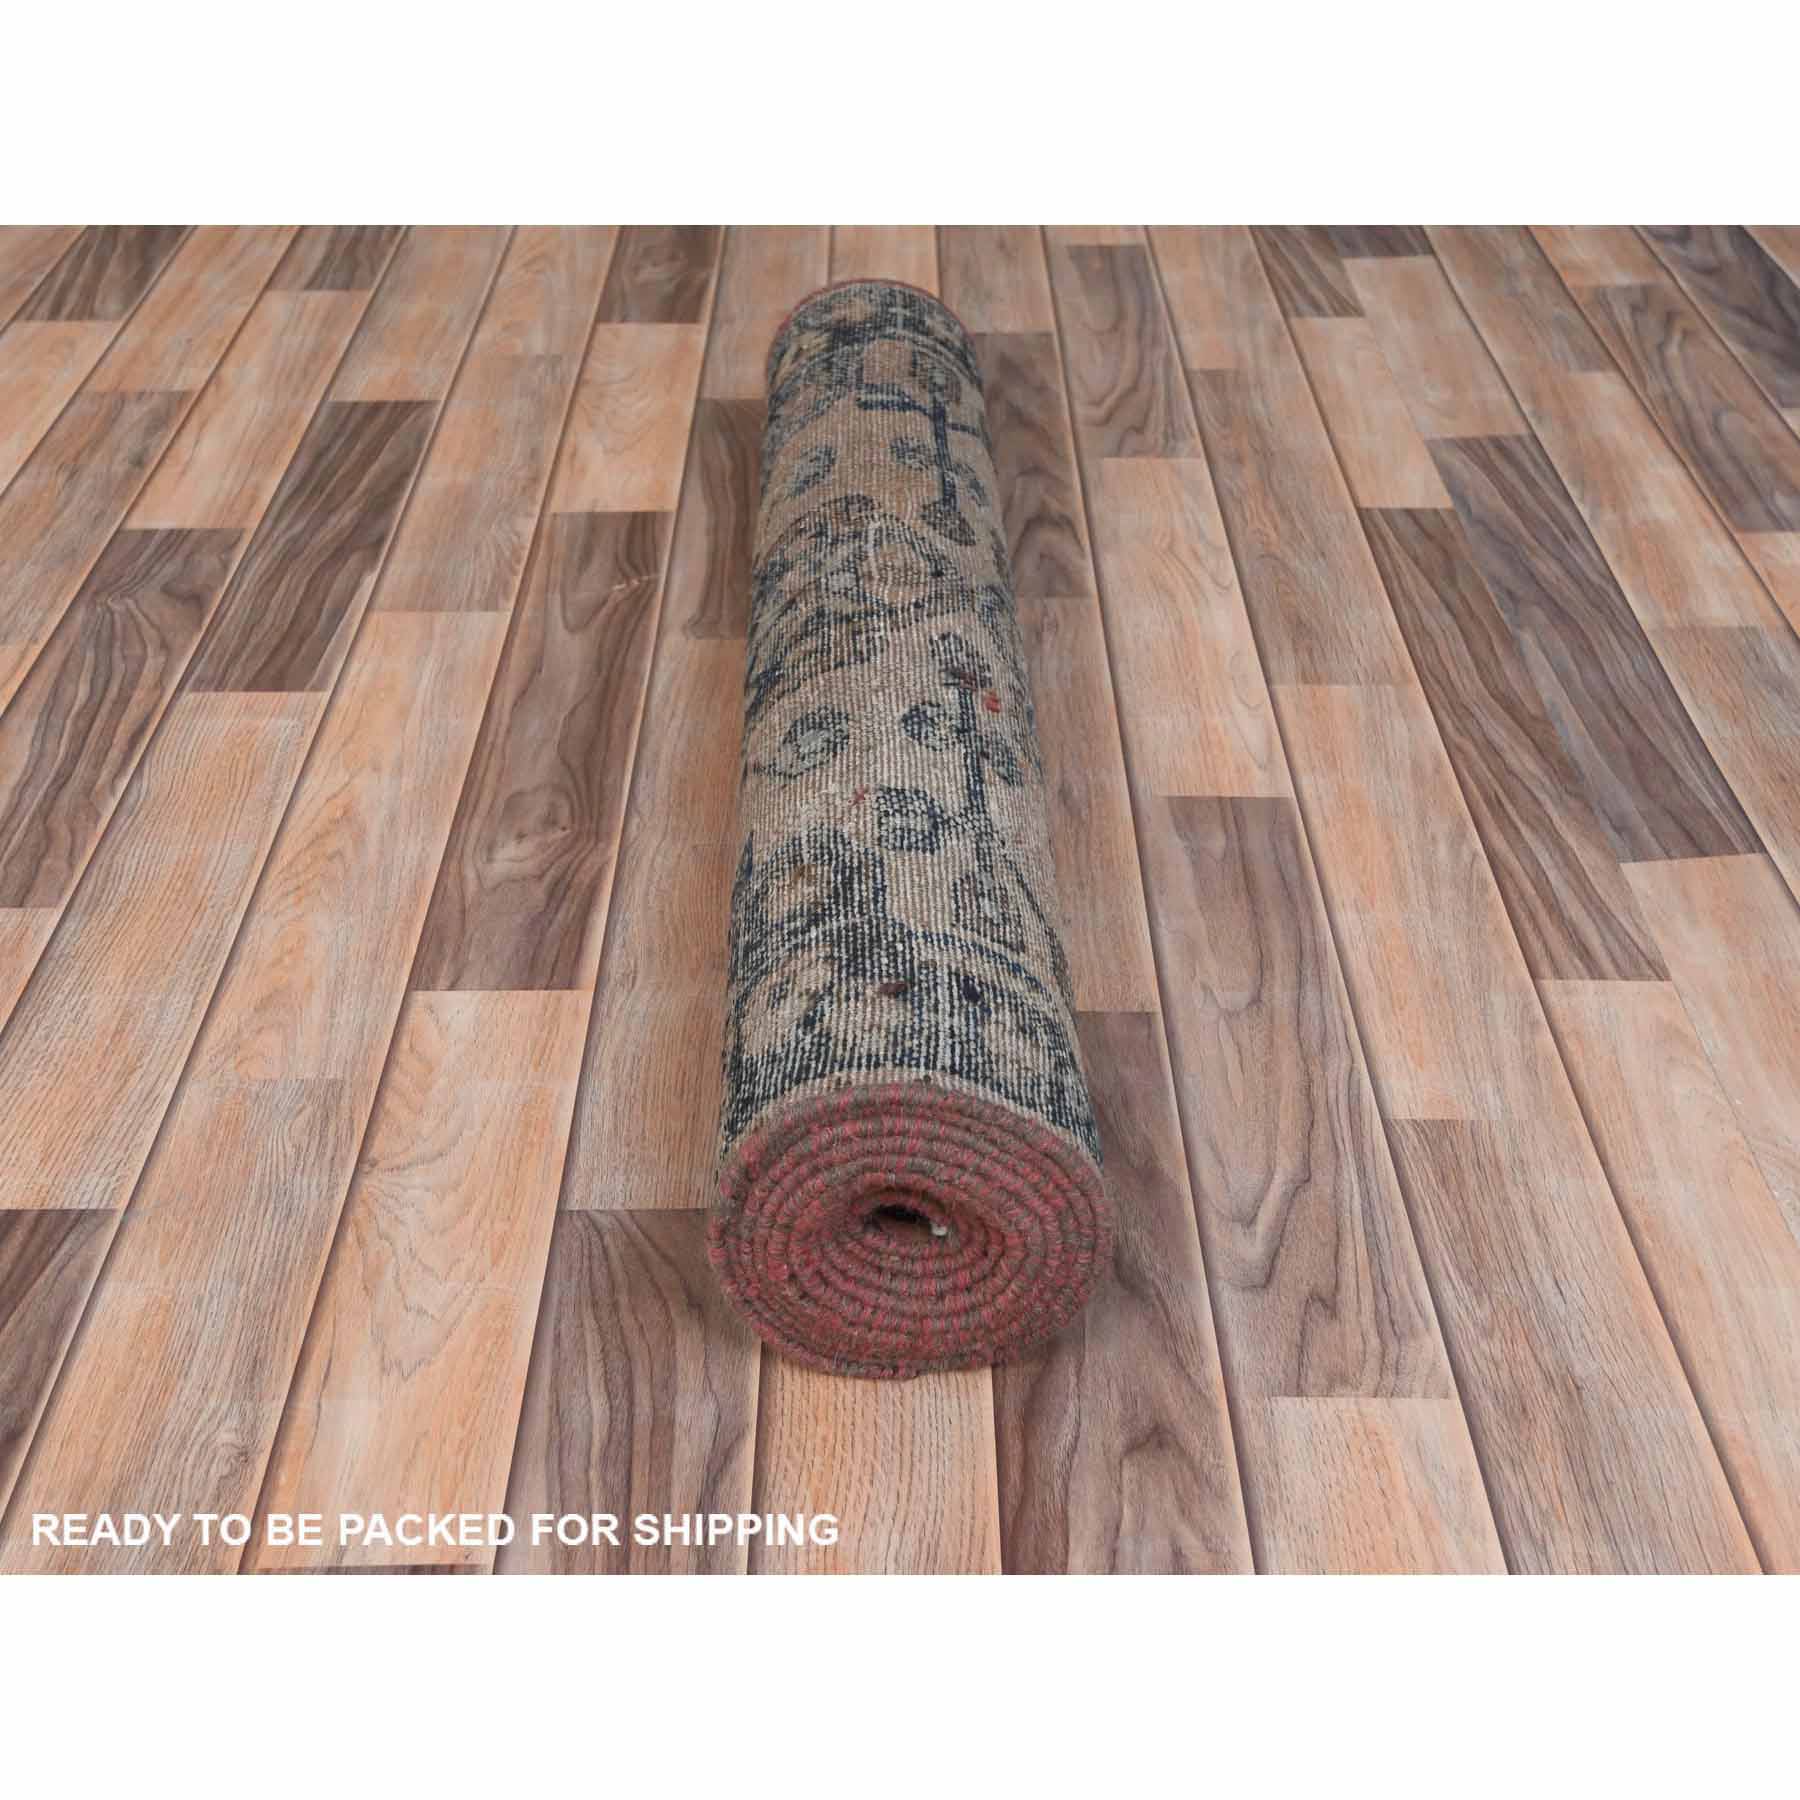 Overdyed-Vintage-Hand-Knotted-Rug-309700